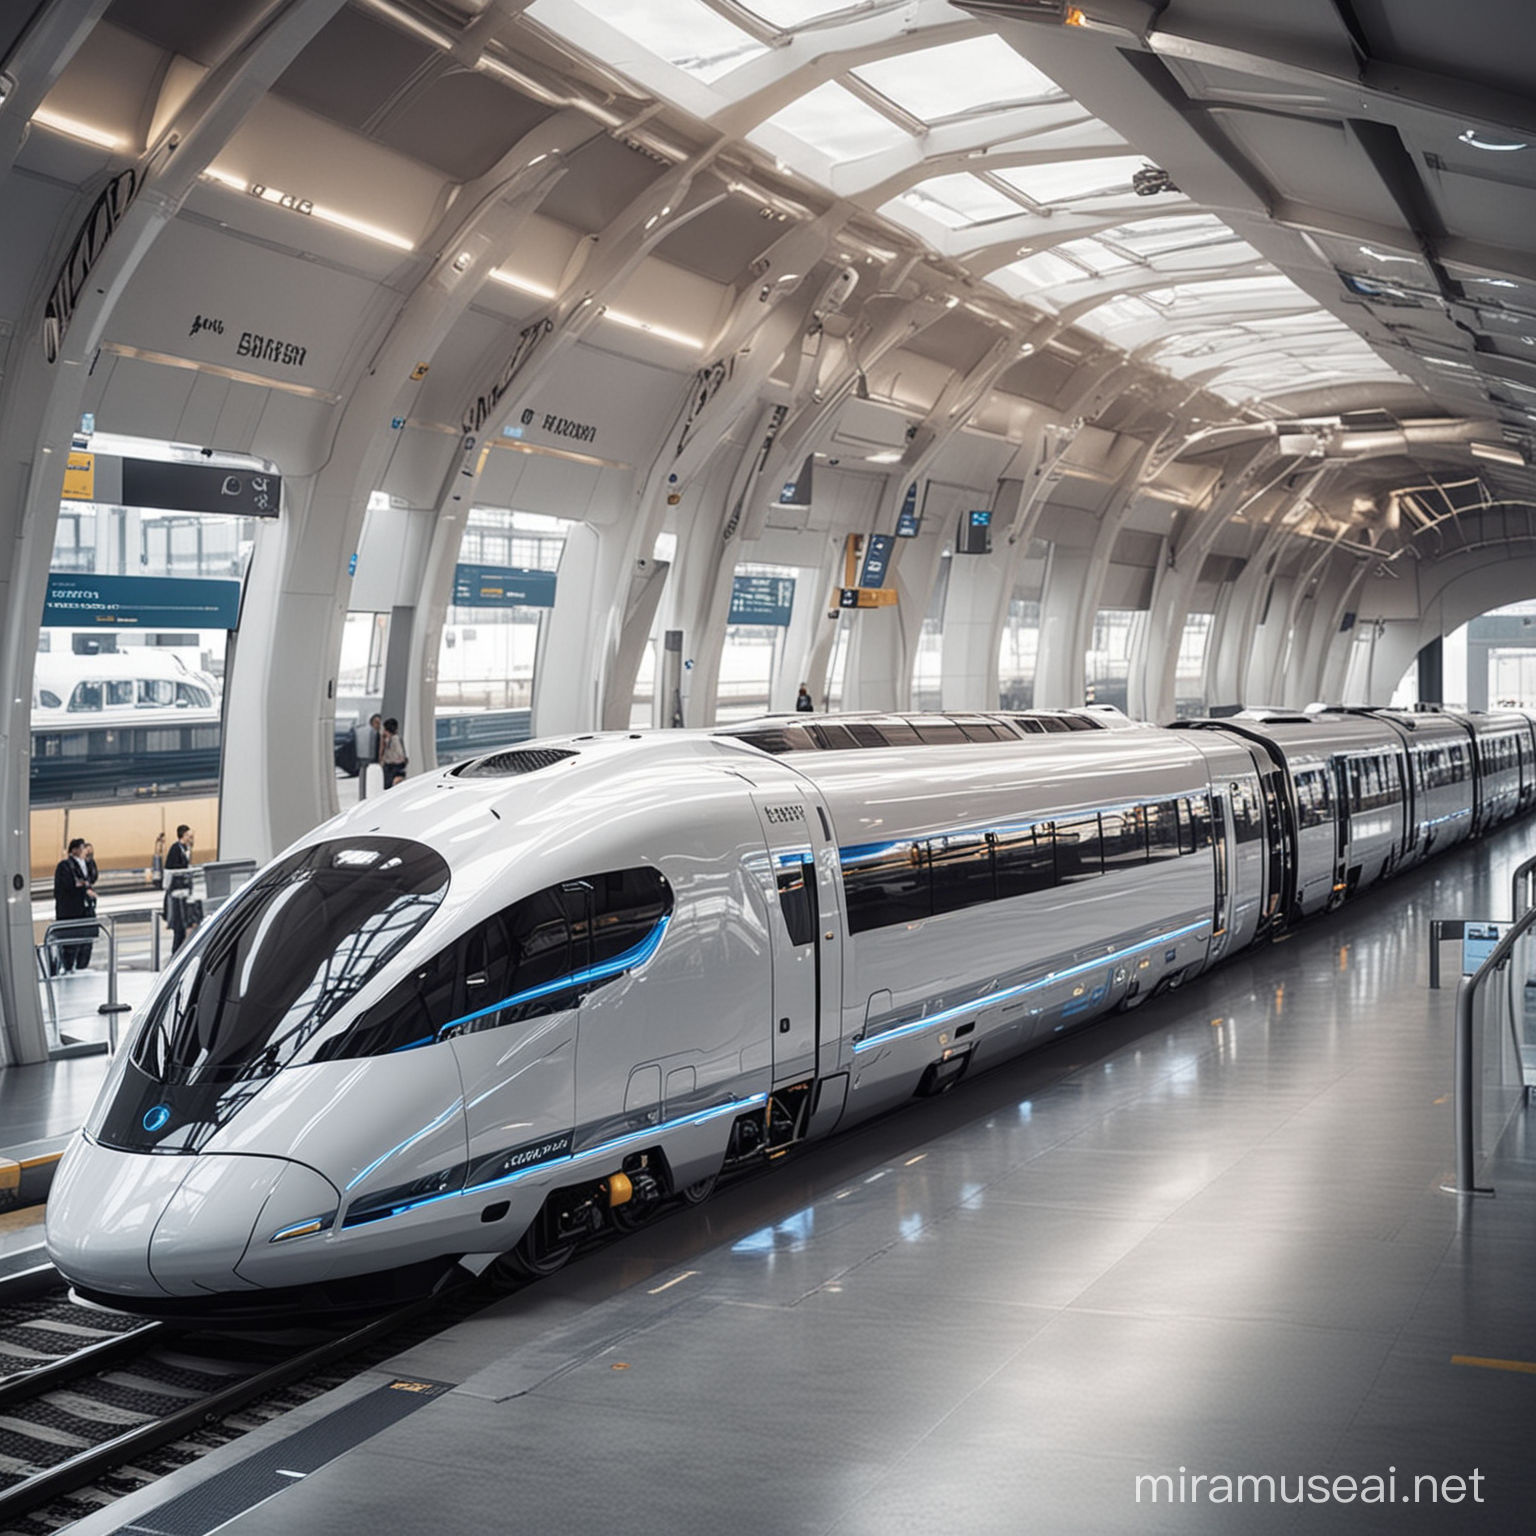 Futuristic Airport Train with Advanced Amenities and AI Monitoring